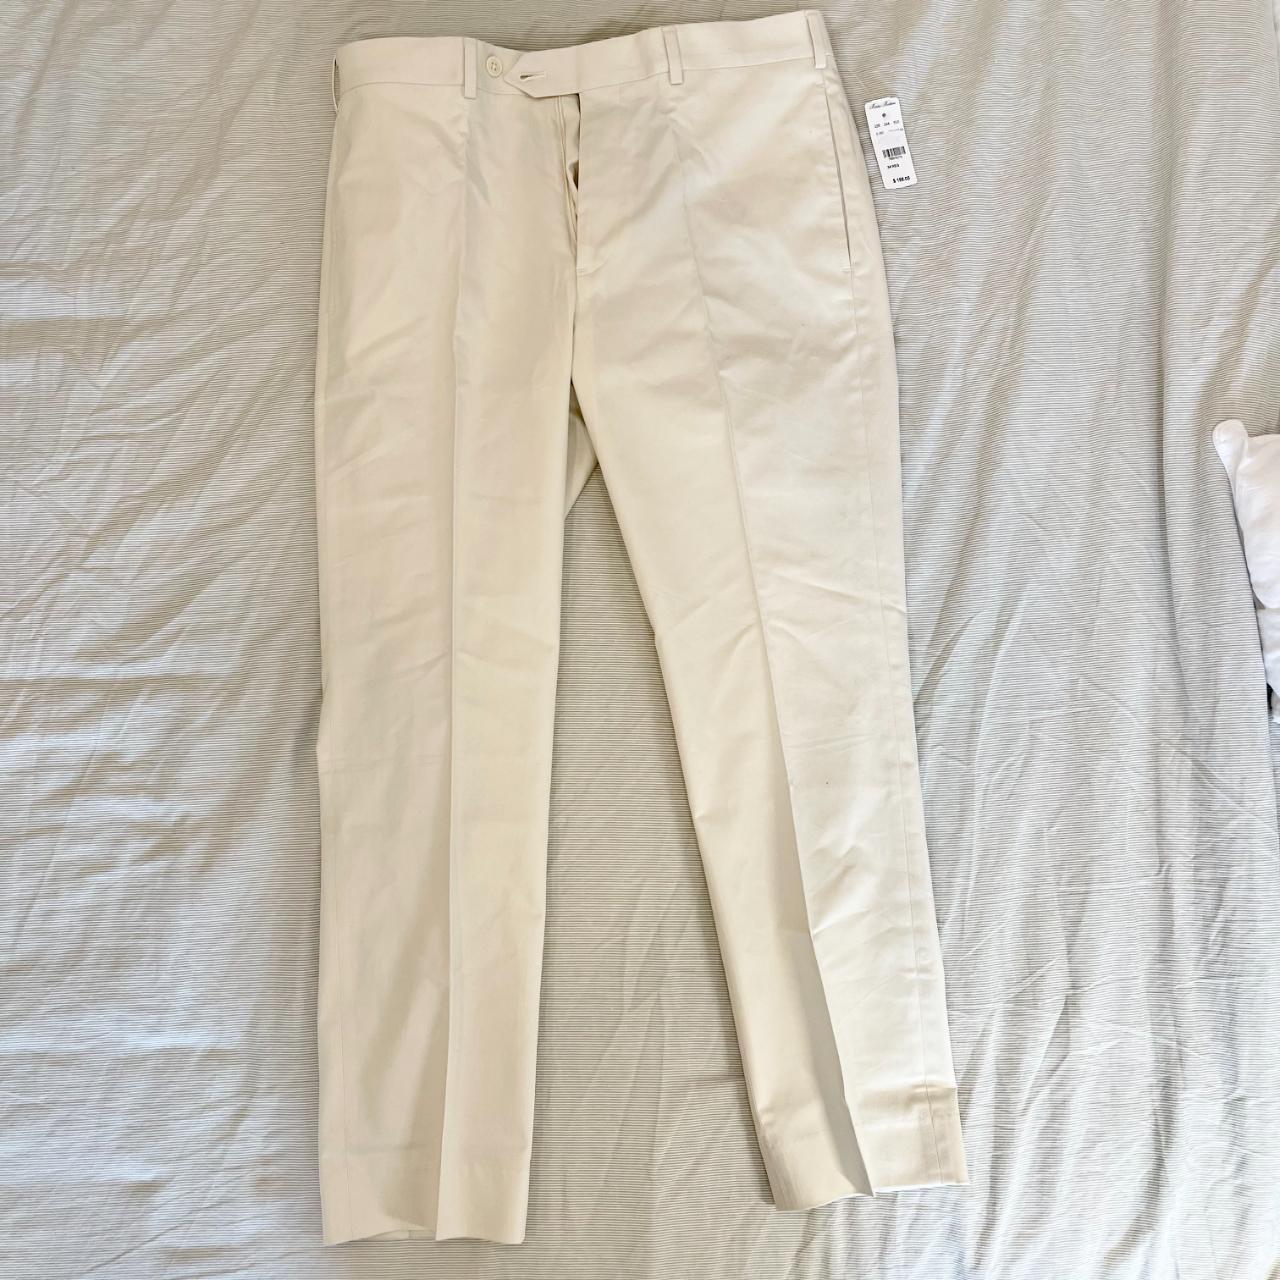 Brooks Brothers Men's Cream and White Trousers | Depop